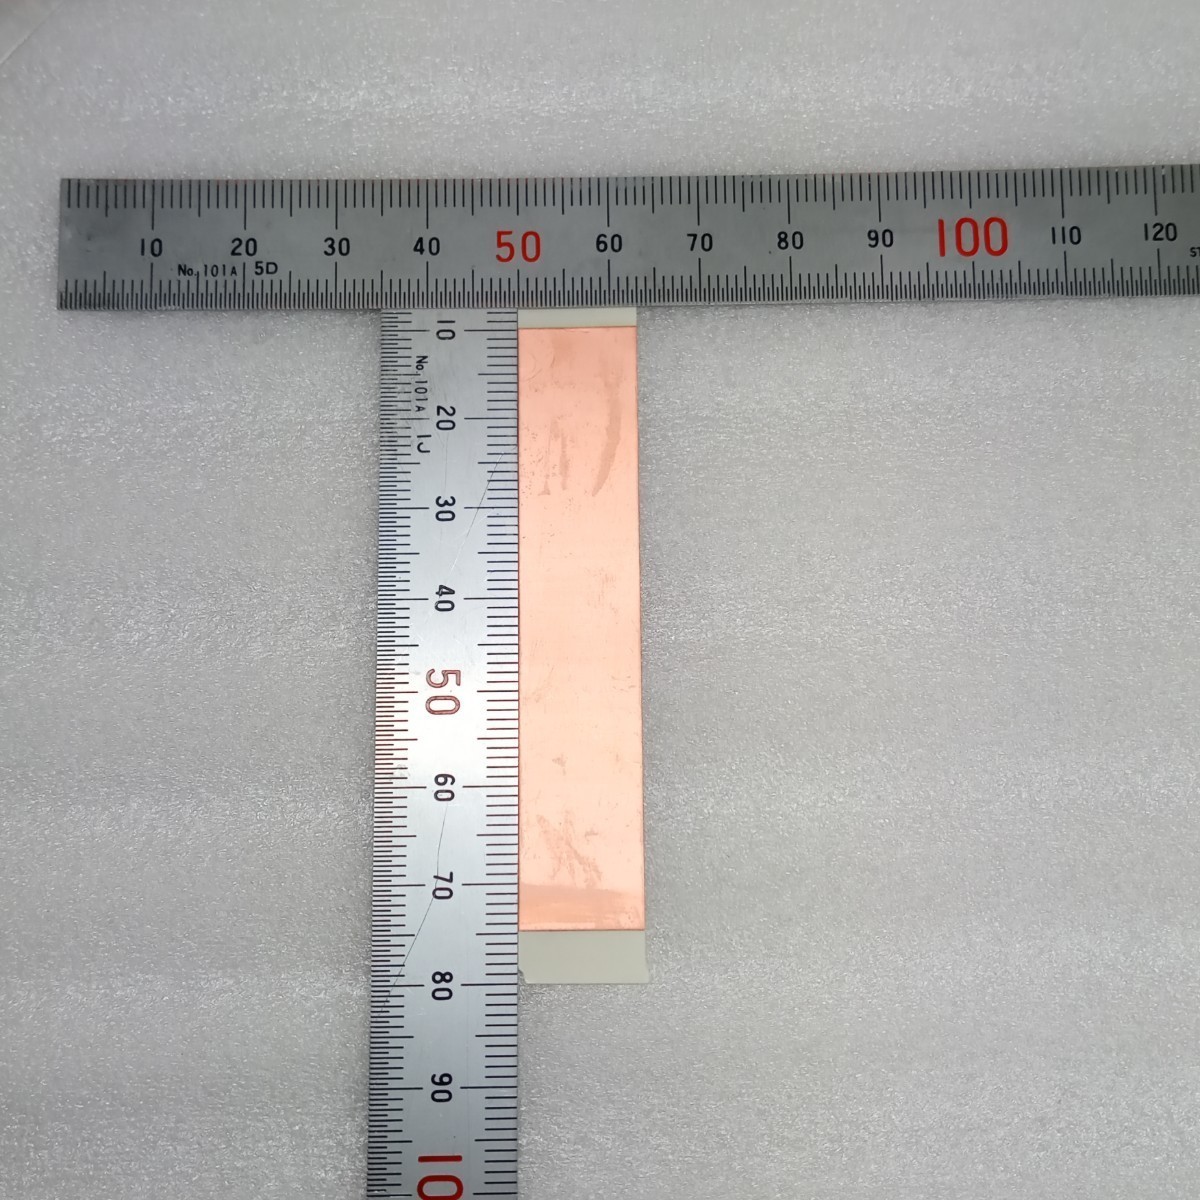  copper . tape 100 pieces set adhesive tape attaching . electro- . tape shield processing electrostatic measures etc. 